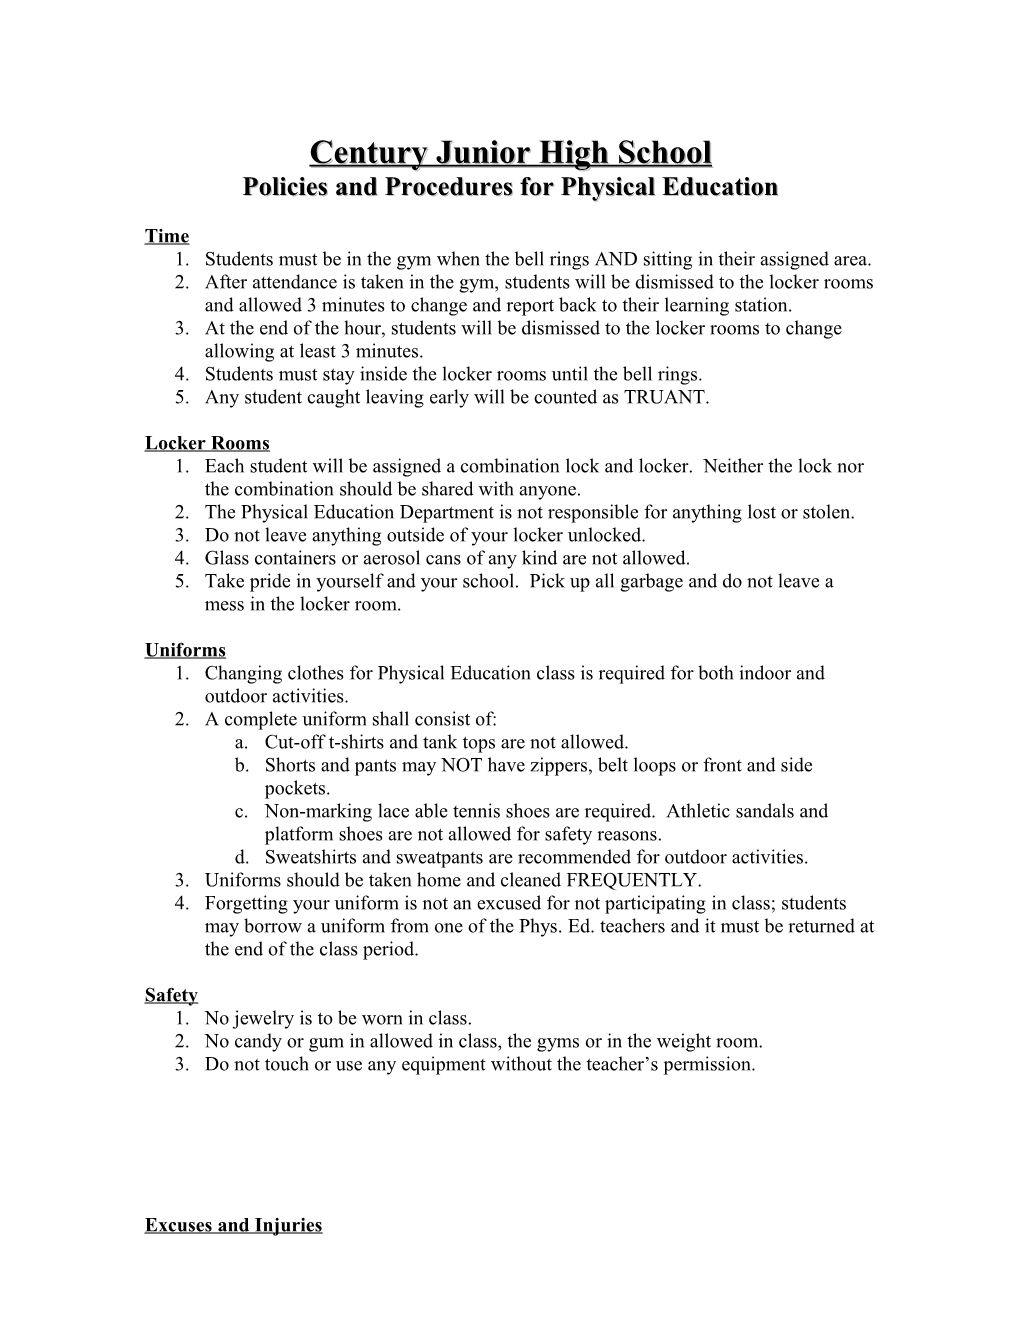 Policies and Procedures for Physical Education